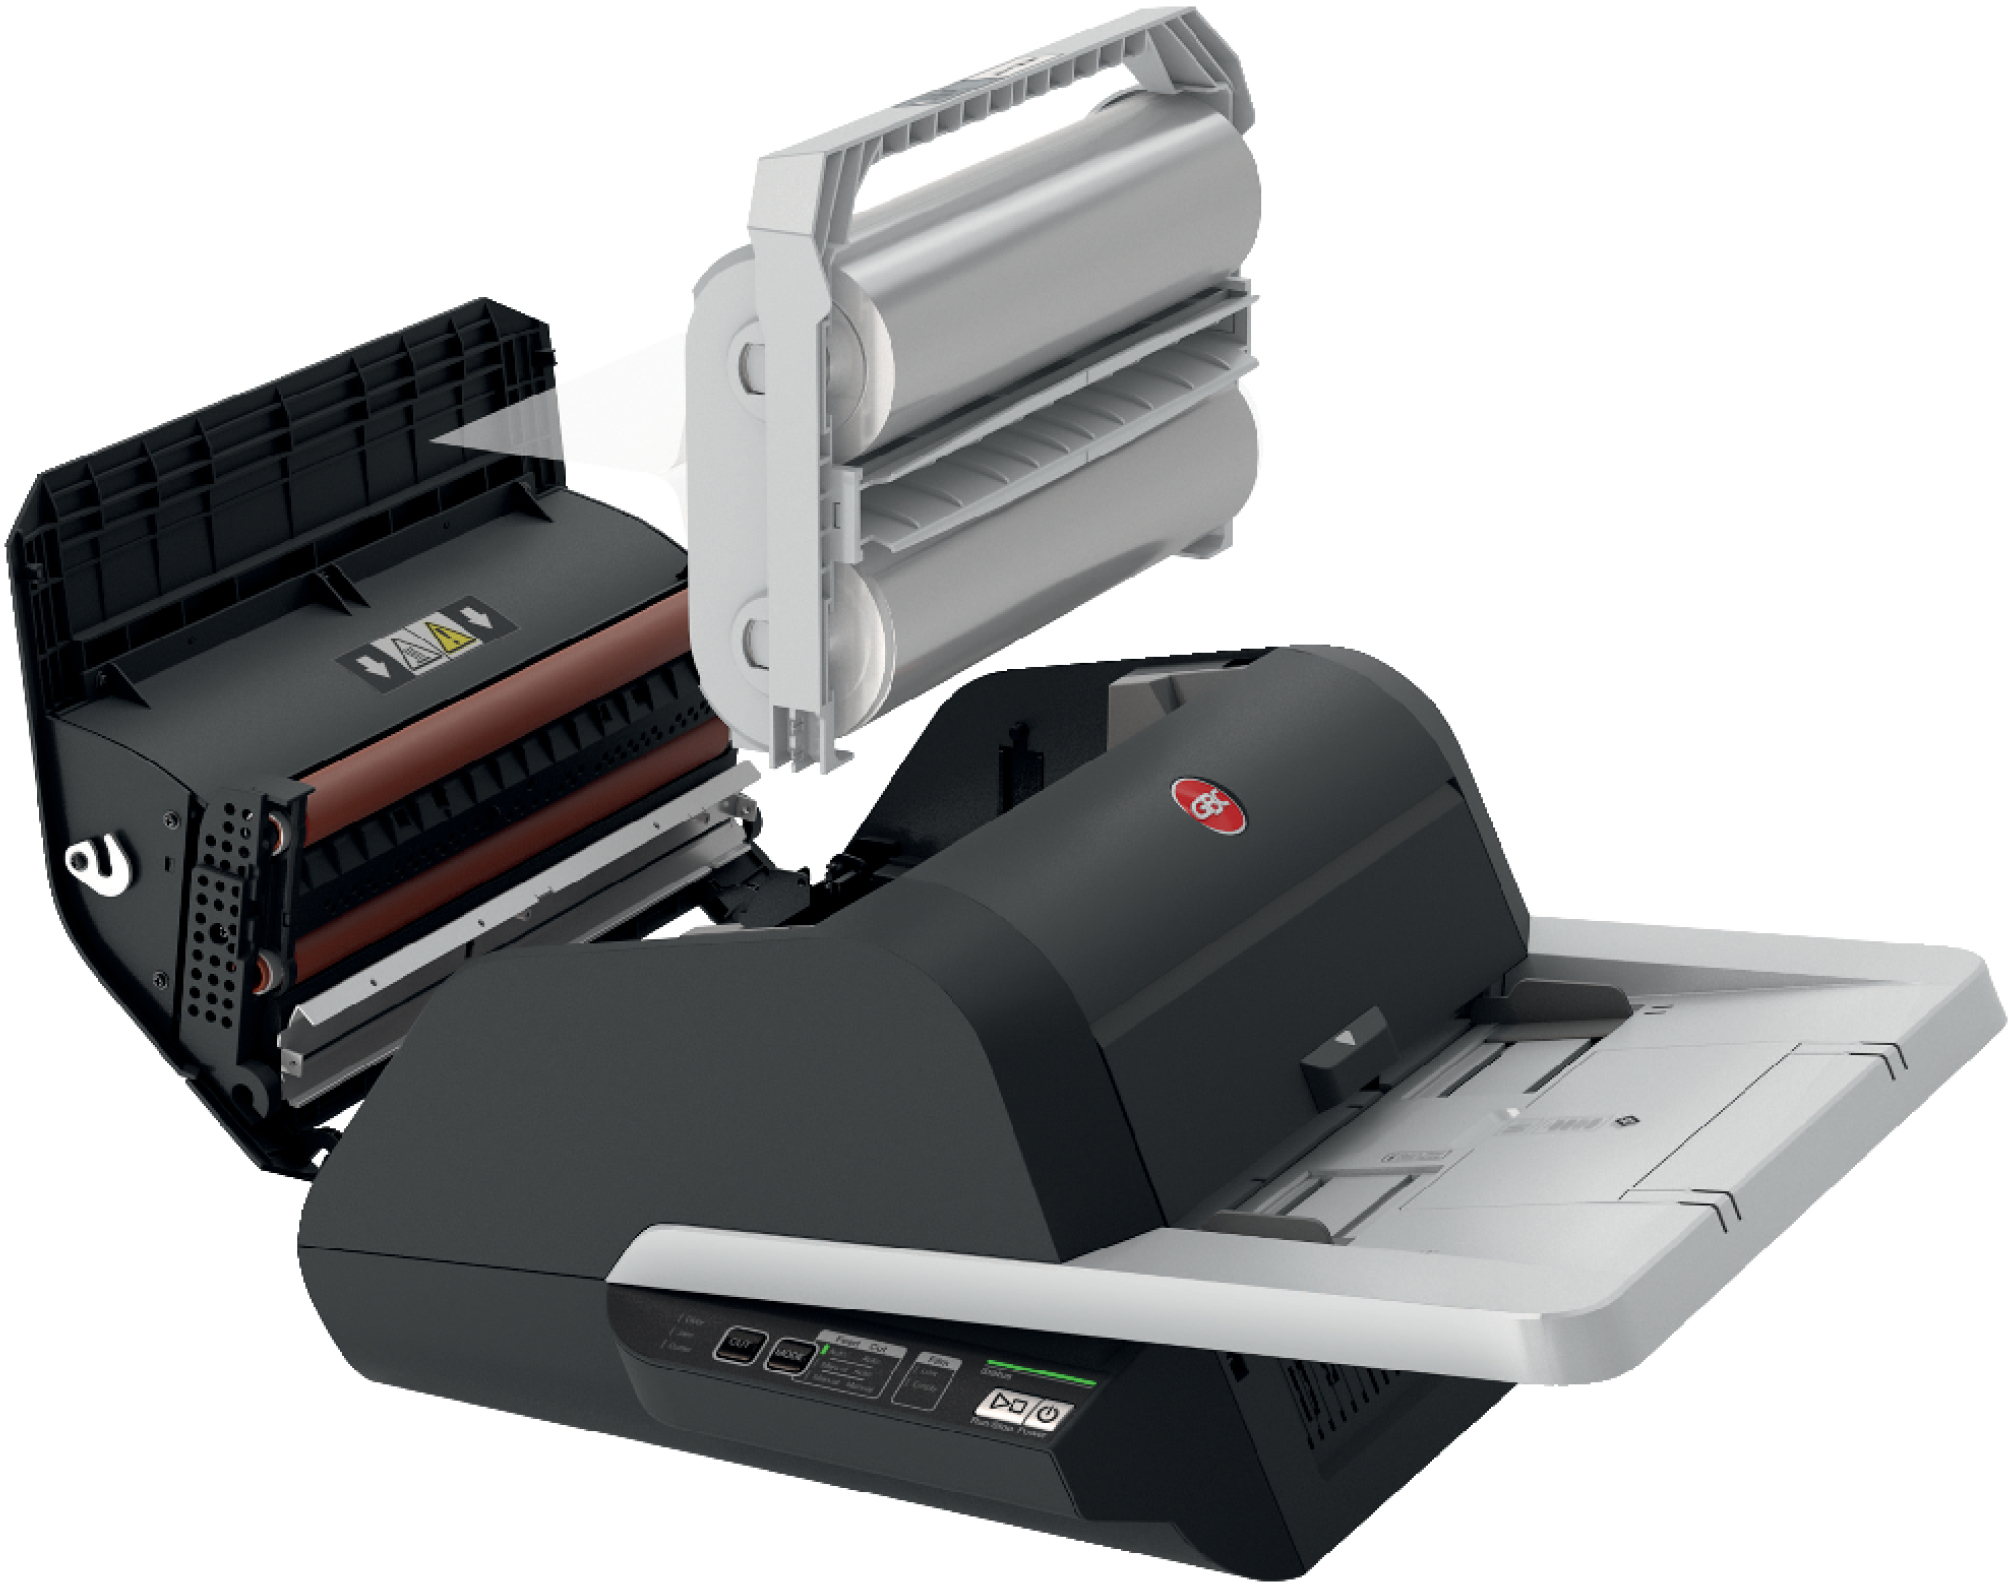 Foton 30 Automatic Laminating Machine Overview - Budget-Friendly, Fast & Reliable!